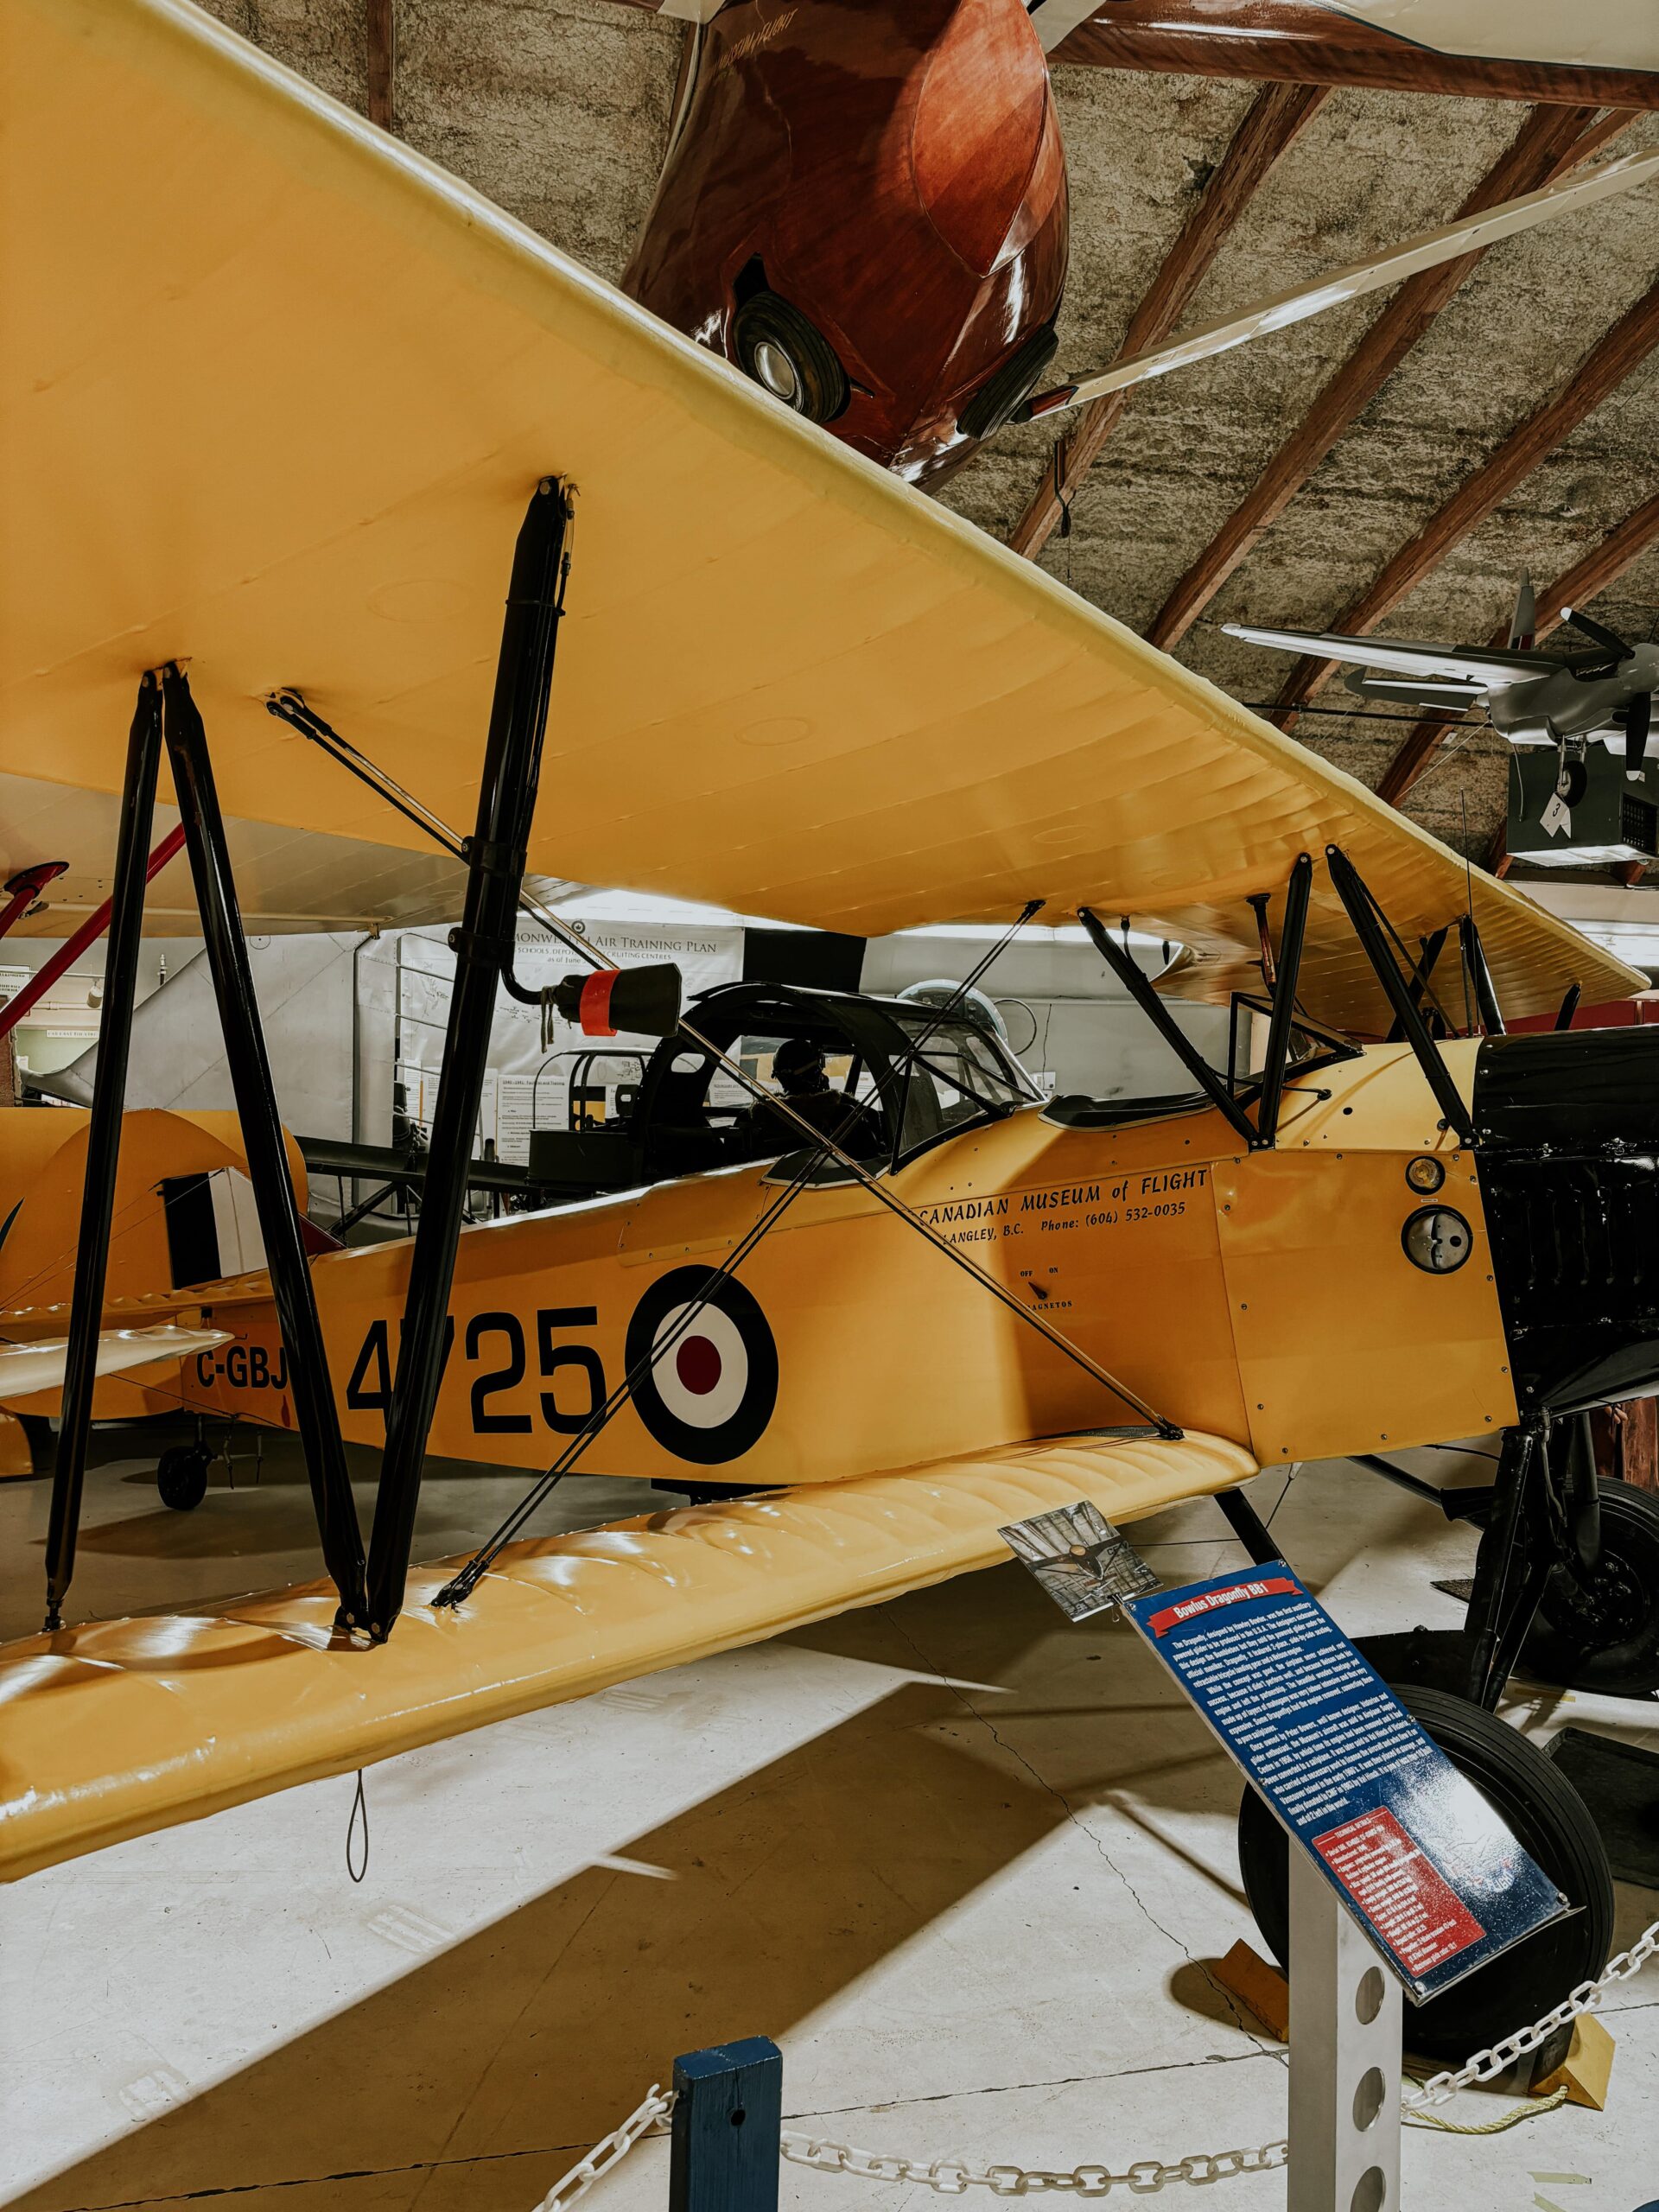 A yellow, older model plane on display